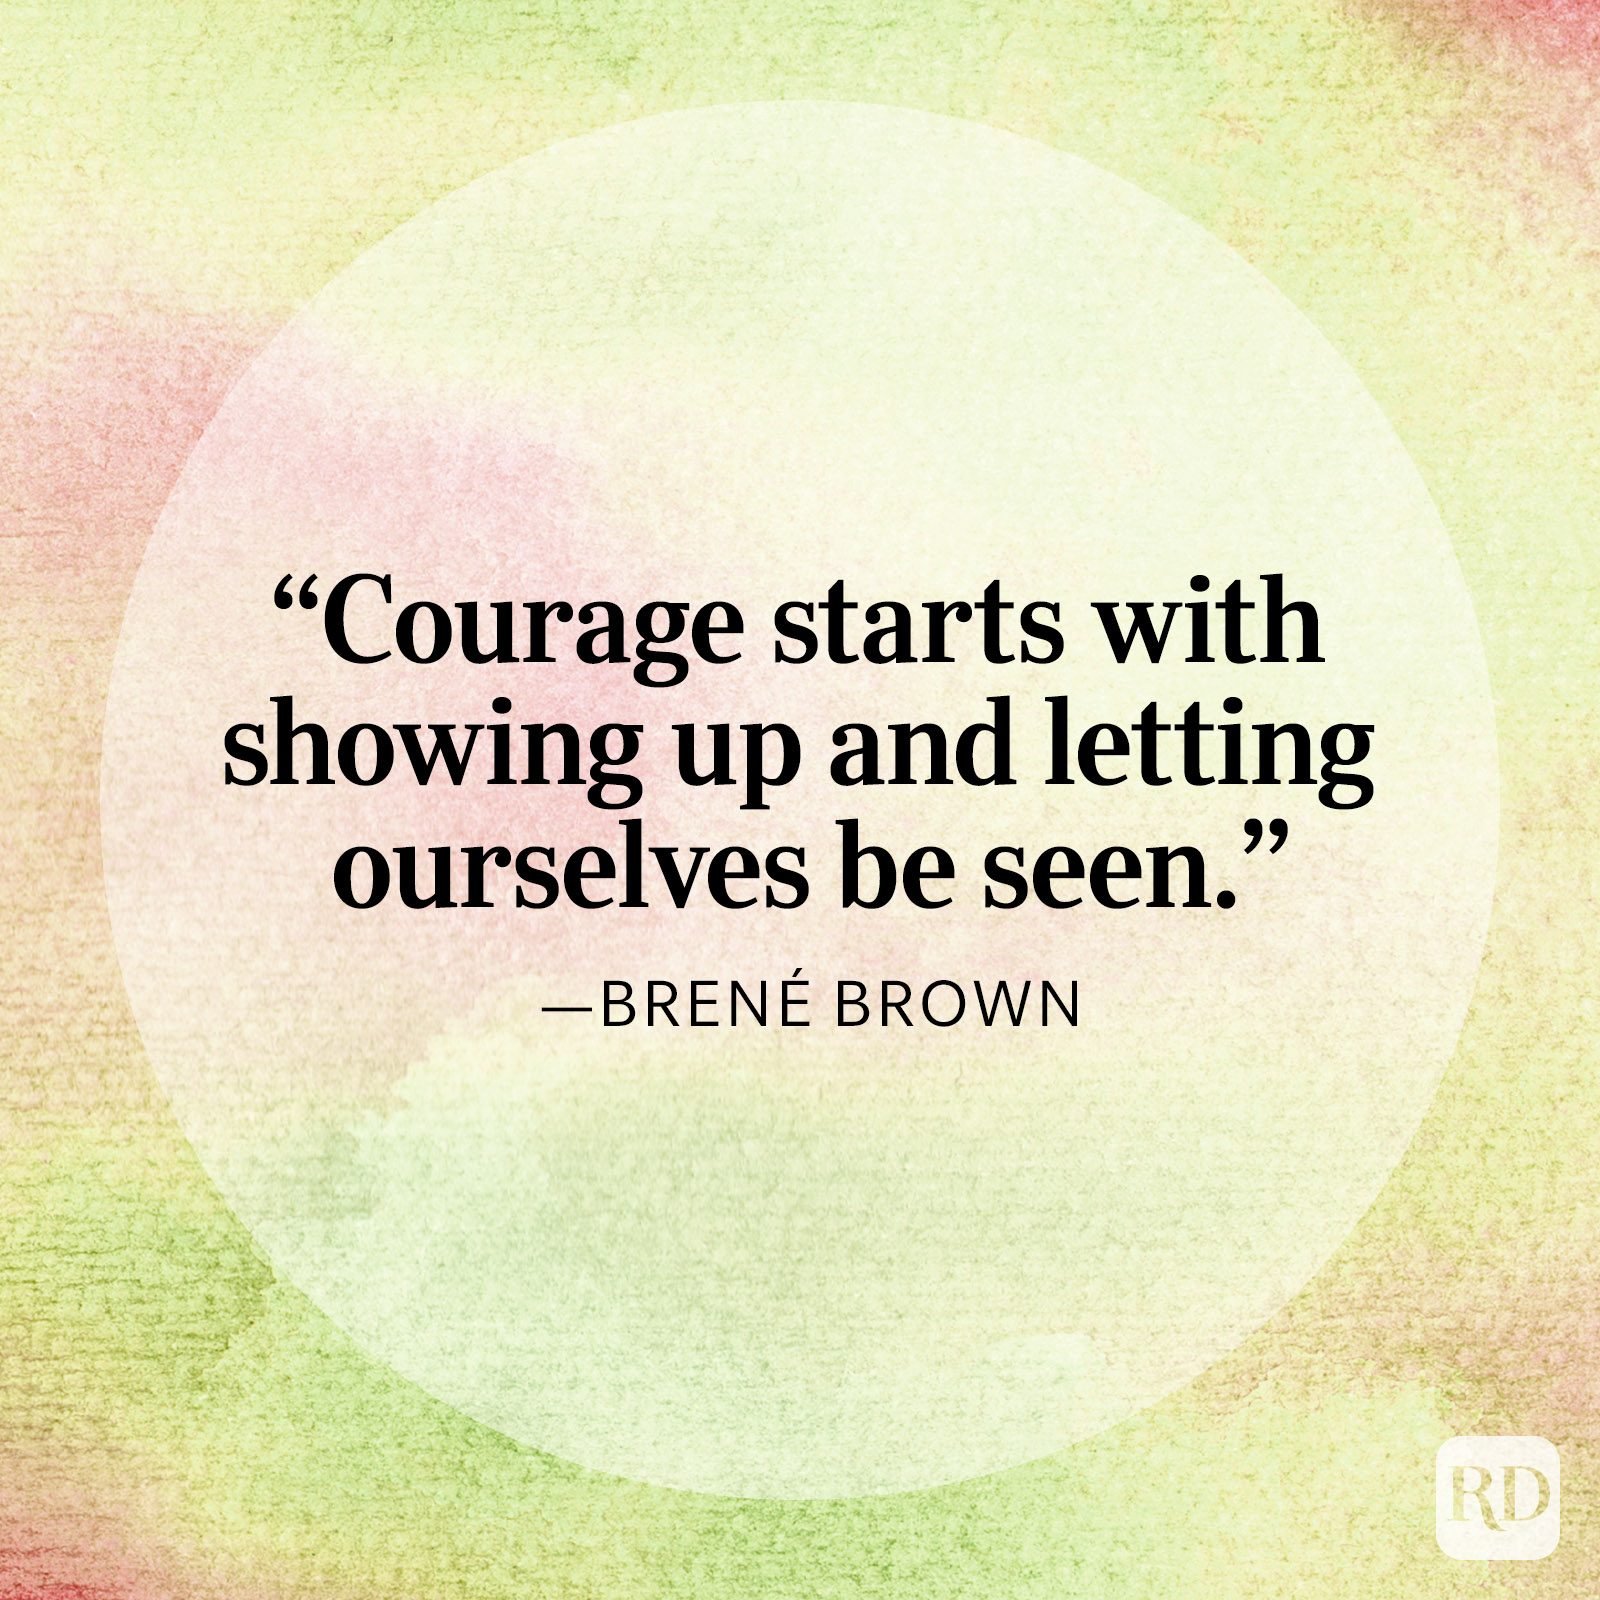 75 Courage Quotes to Inspire You to Face Your Fears